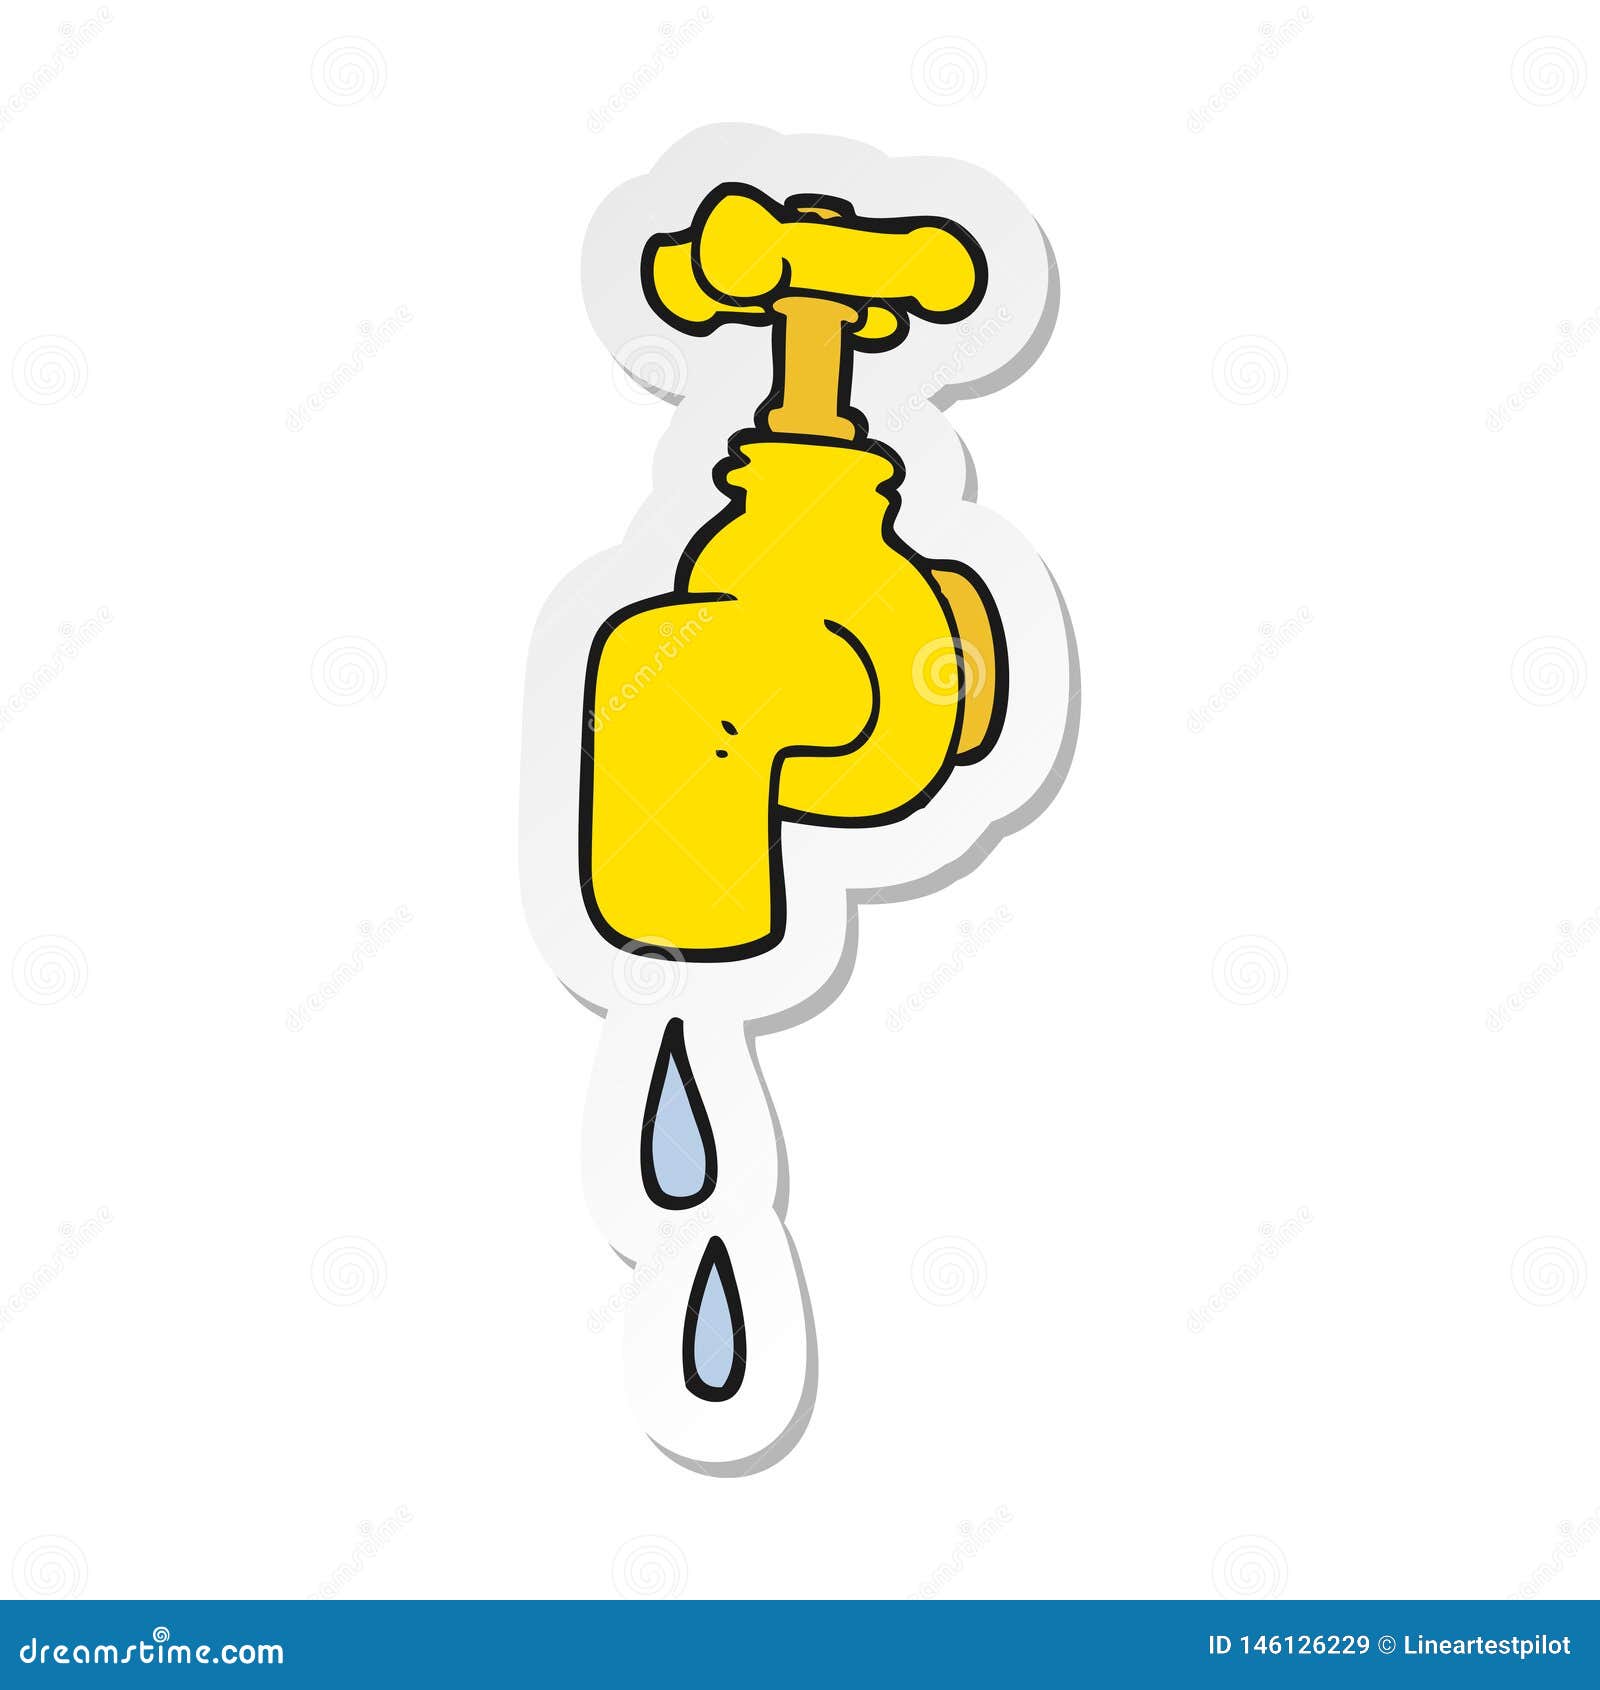 Sticker of a Cartoon Dripping Faucet Stock Vector - Illustration of hand,  objects: 146126229